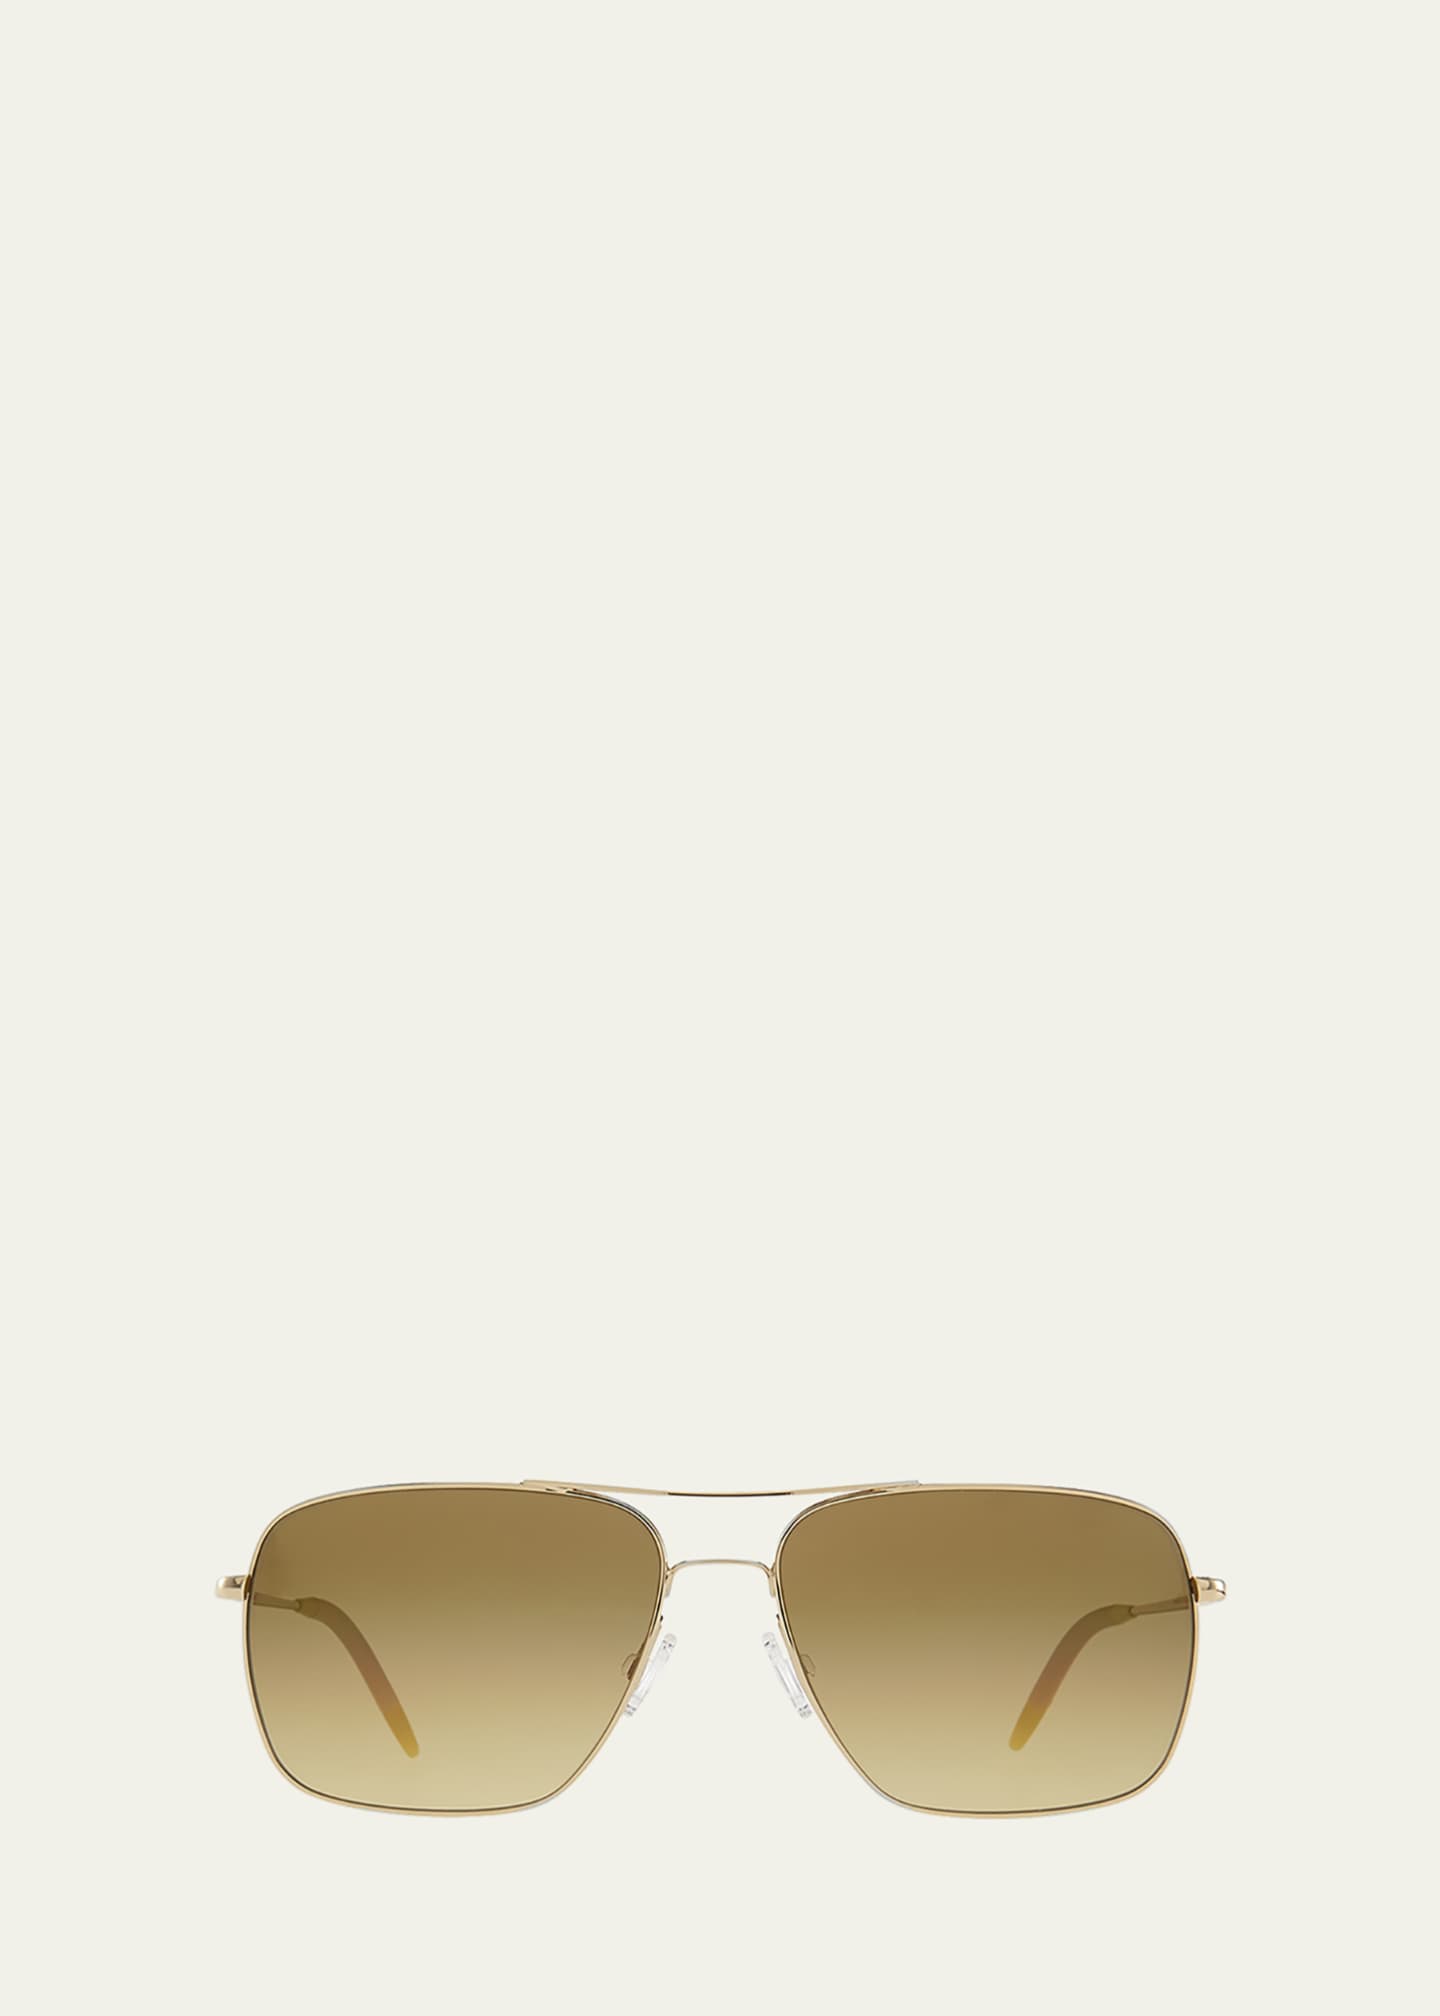 Oliver Peoples Clifton Photochromic Sunglasses, Gold - Bergdorf Goodman